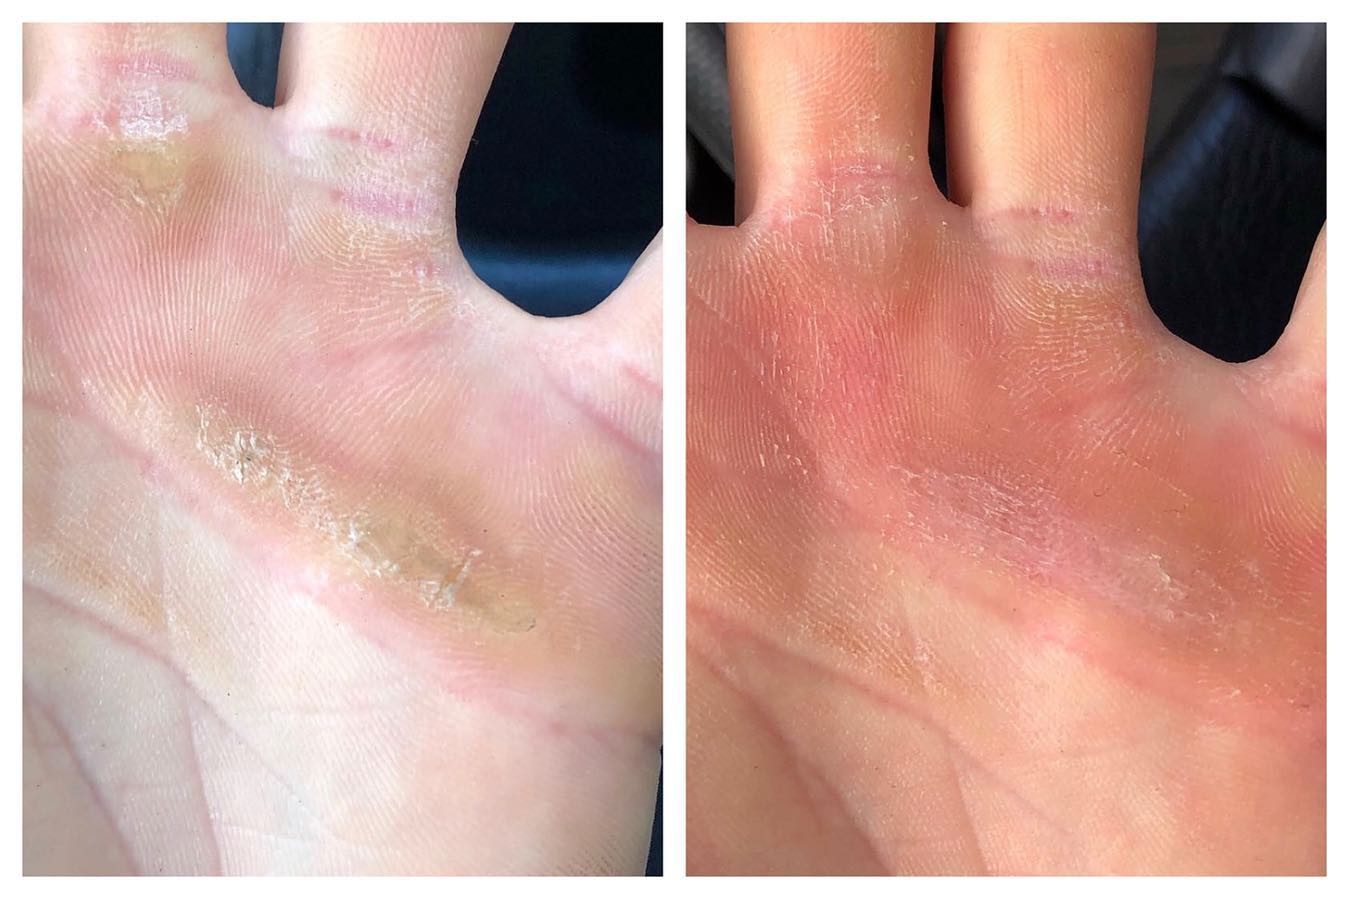 How Do I Prevent Hand Calluses When Working Out? -  ☑️